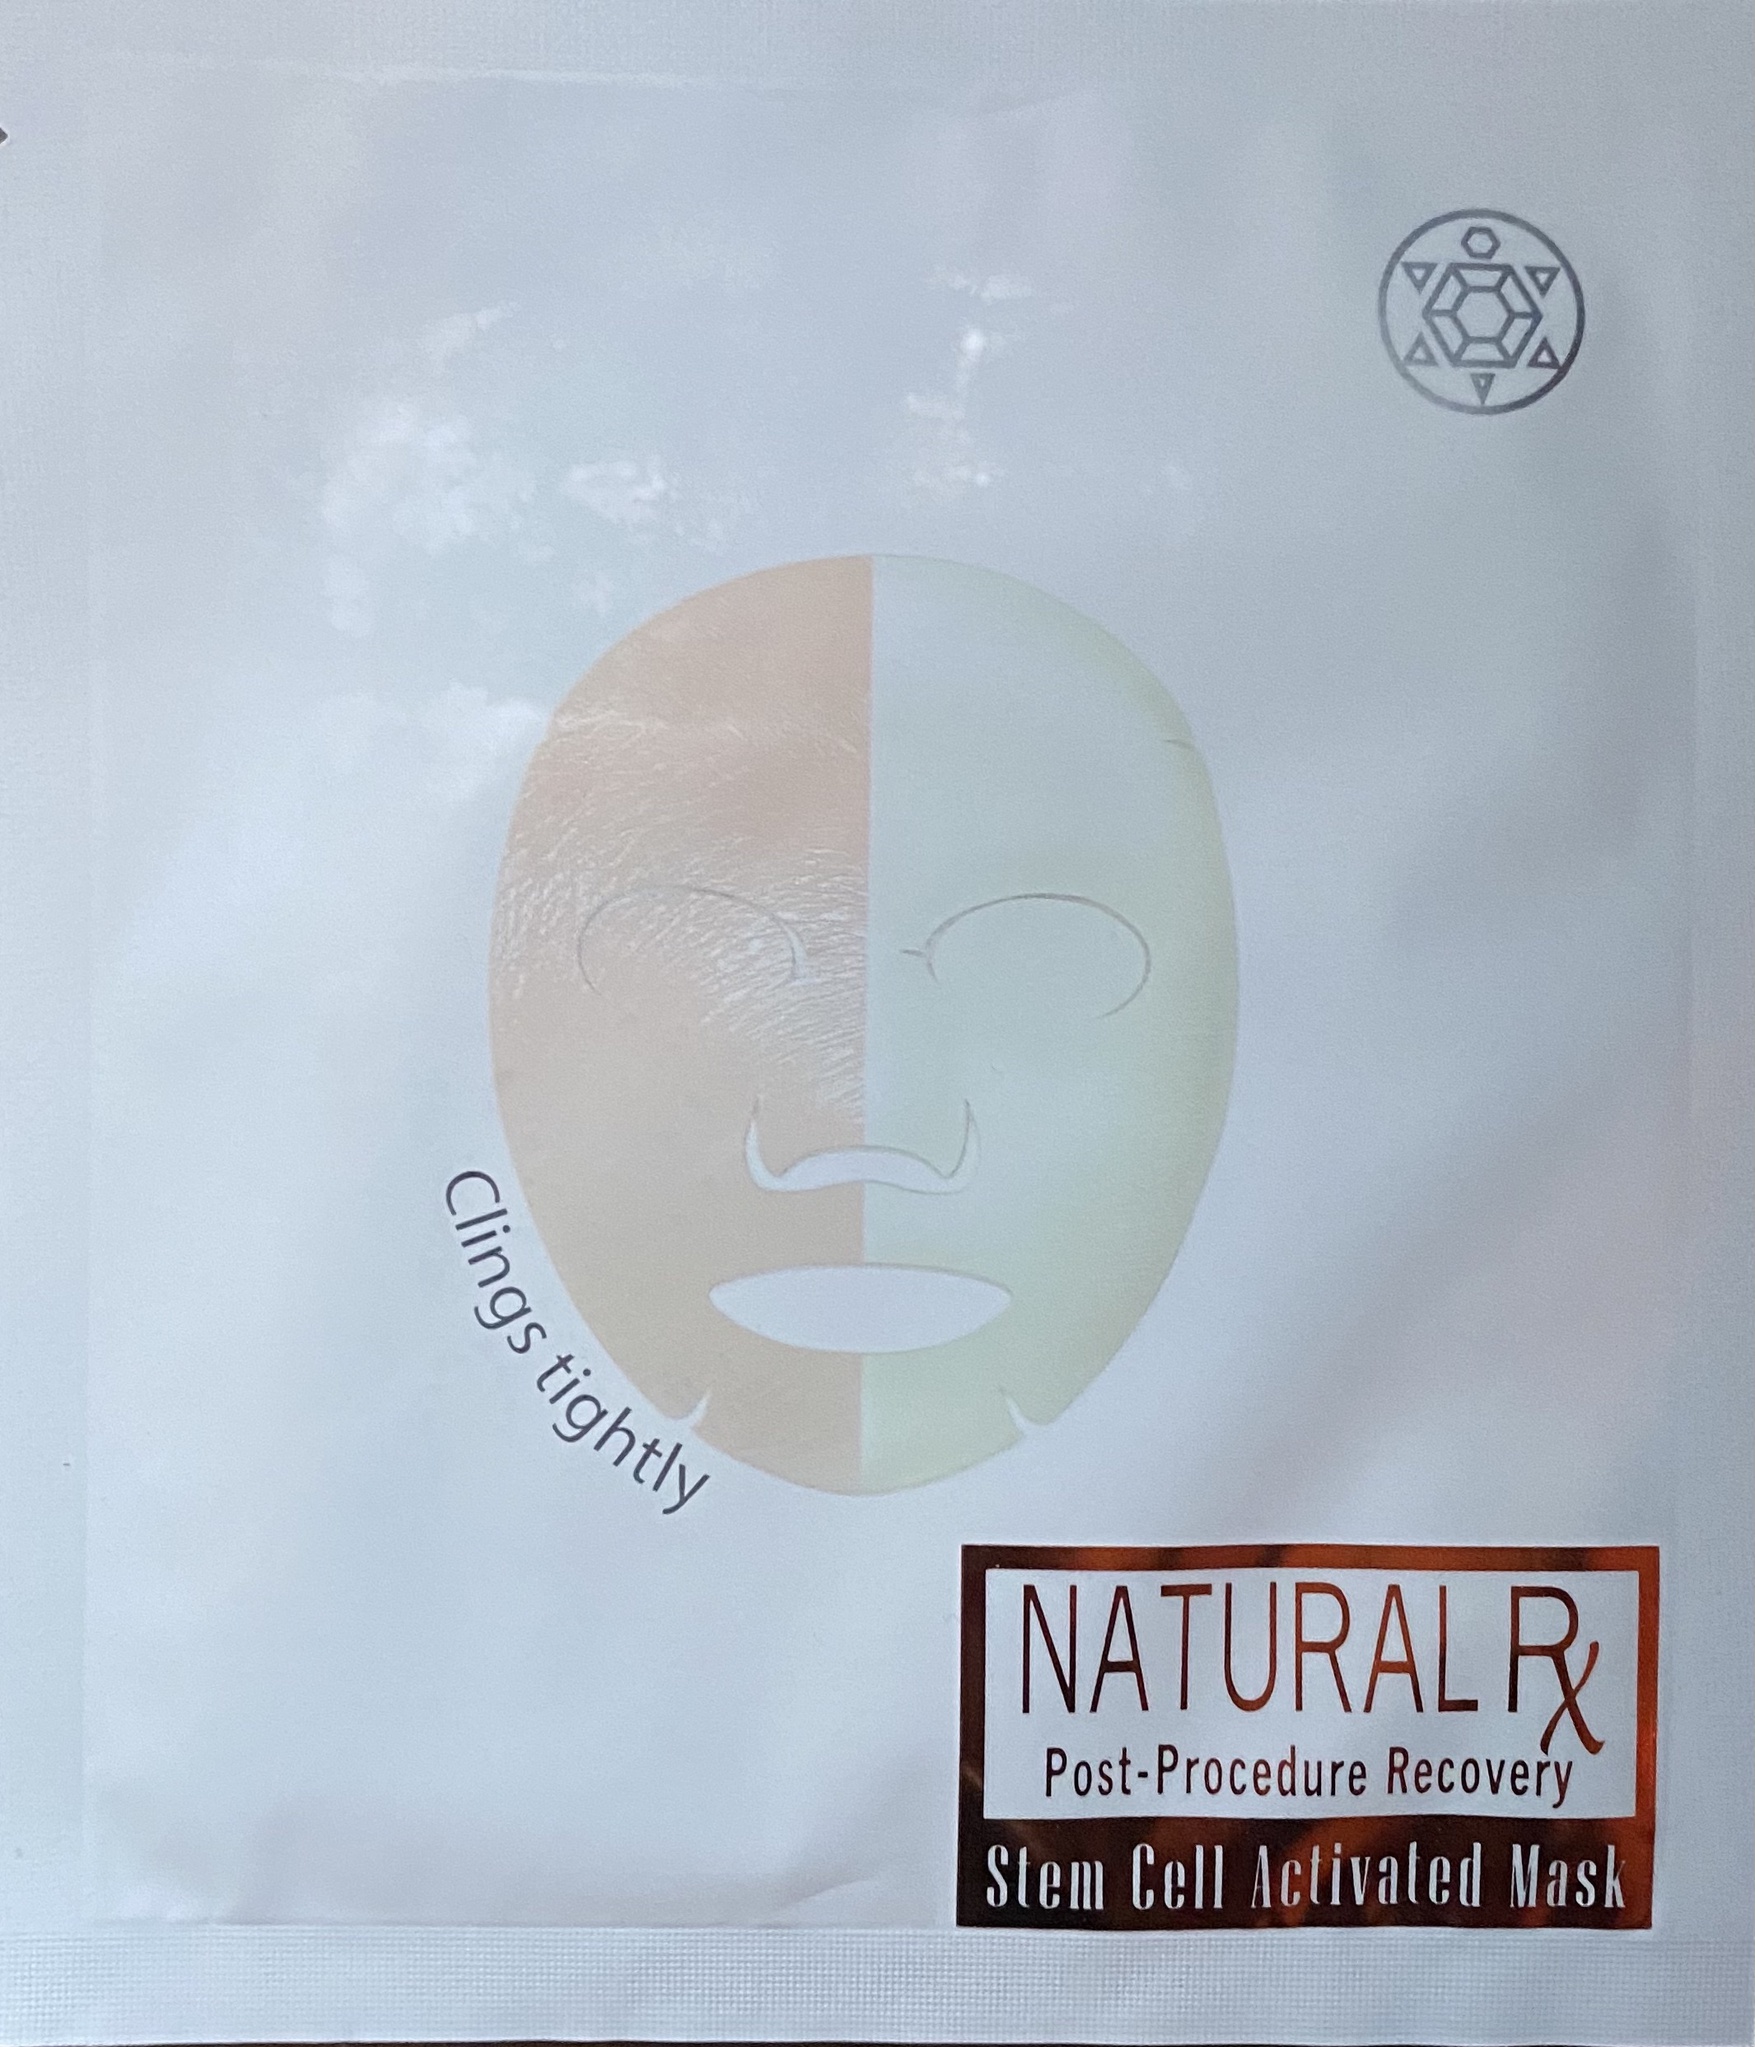 Natural RX Post-Procedure Recovery Stem Cell Activated Mask